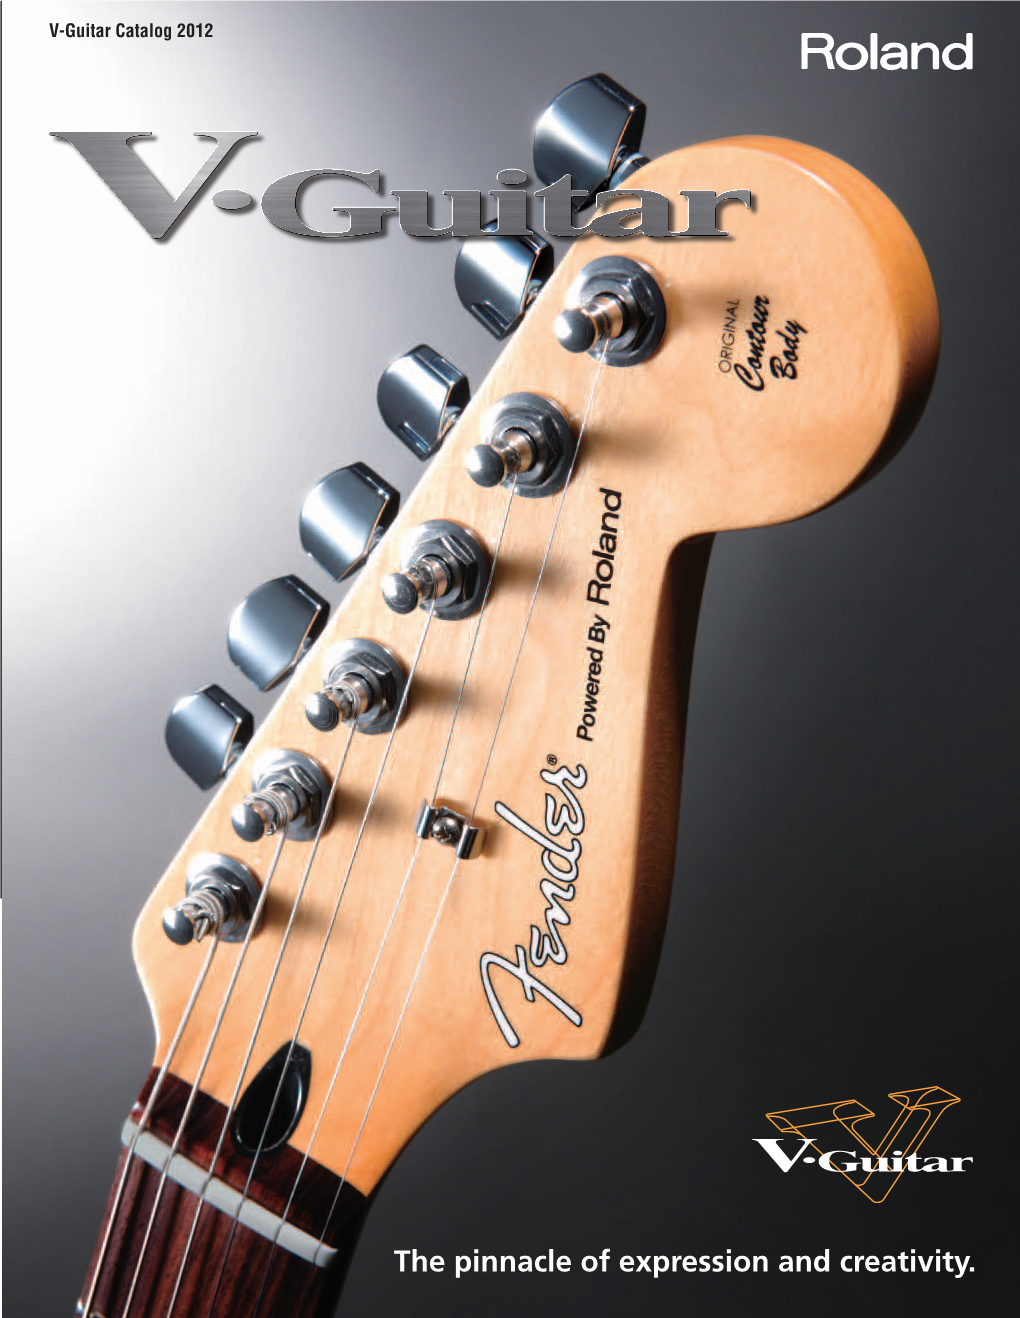 Roland V-Guitar — a Coveted Classic Meets Future Technology